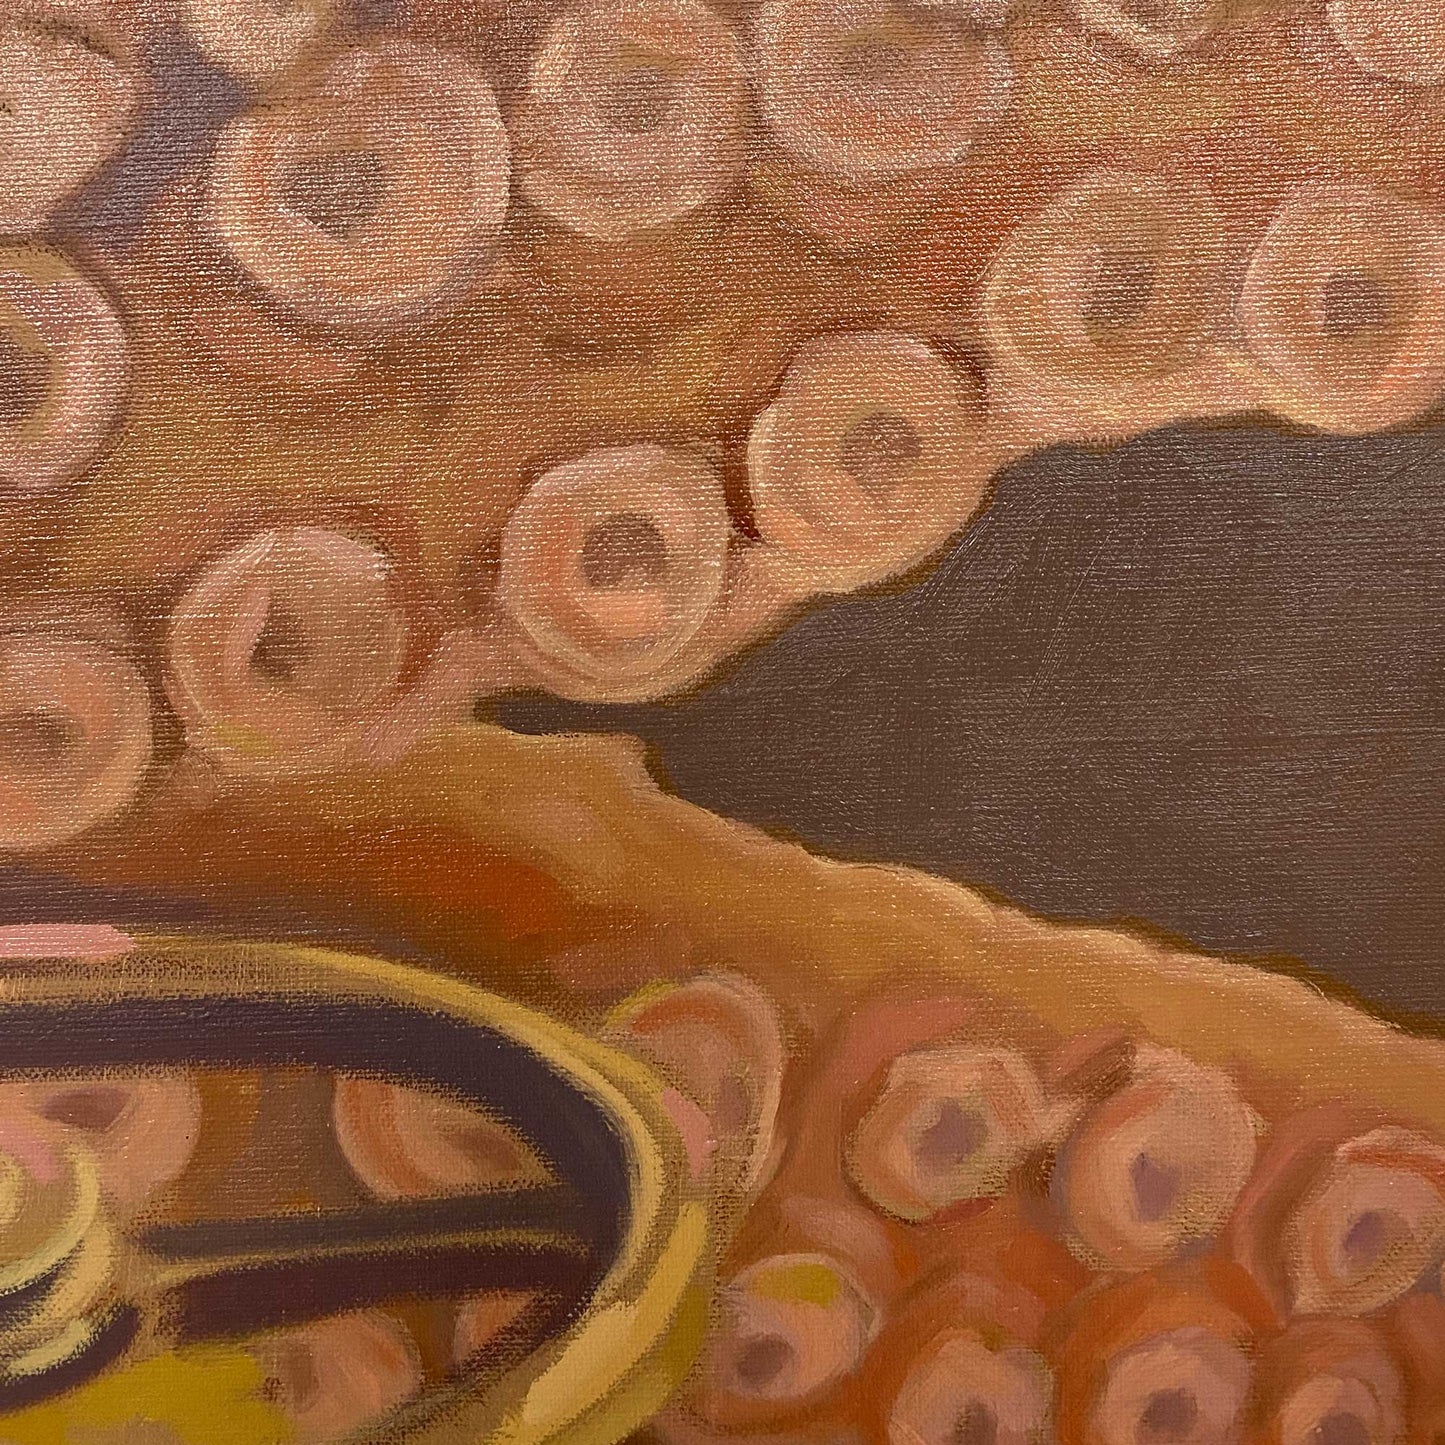 2019, gears and octopus, 70 x 100 cm